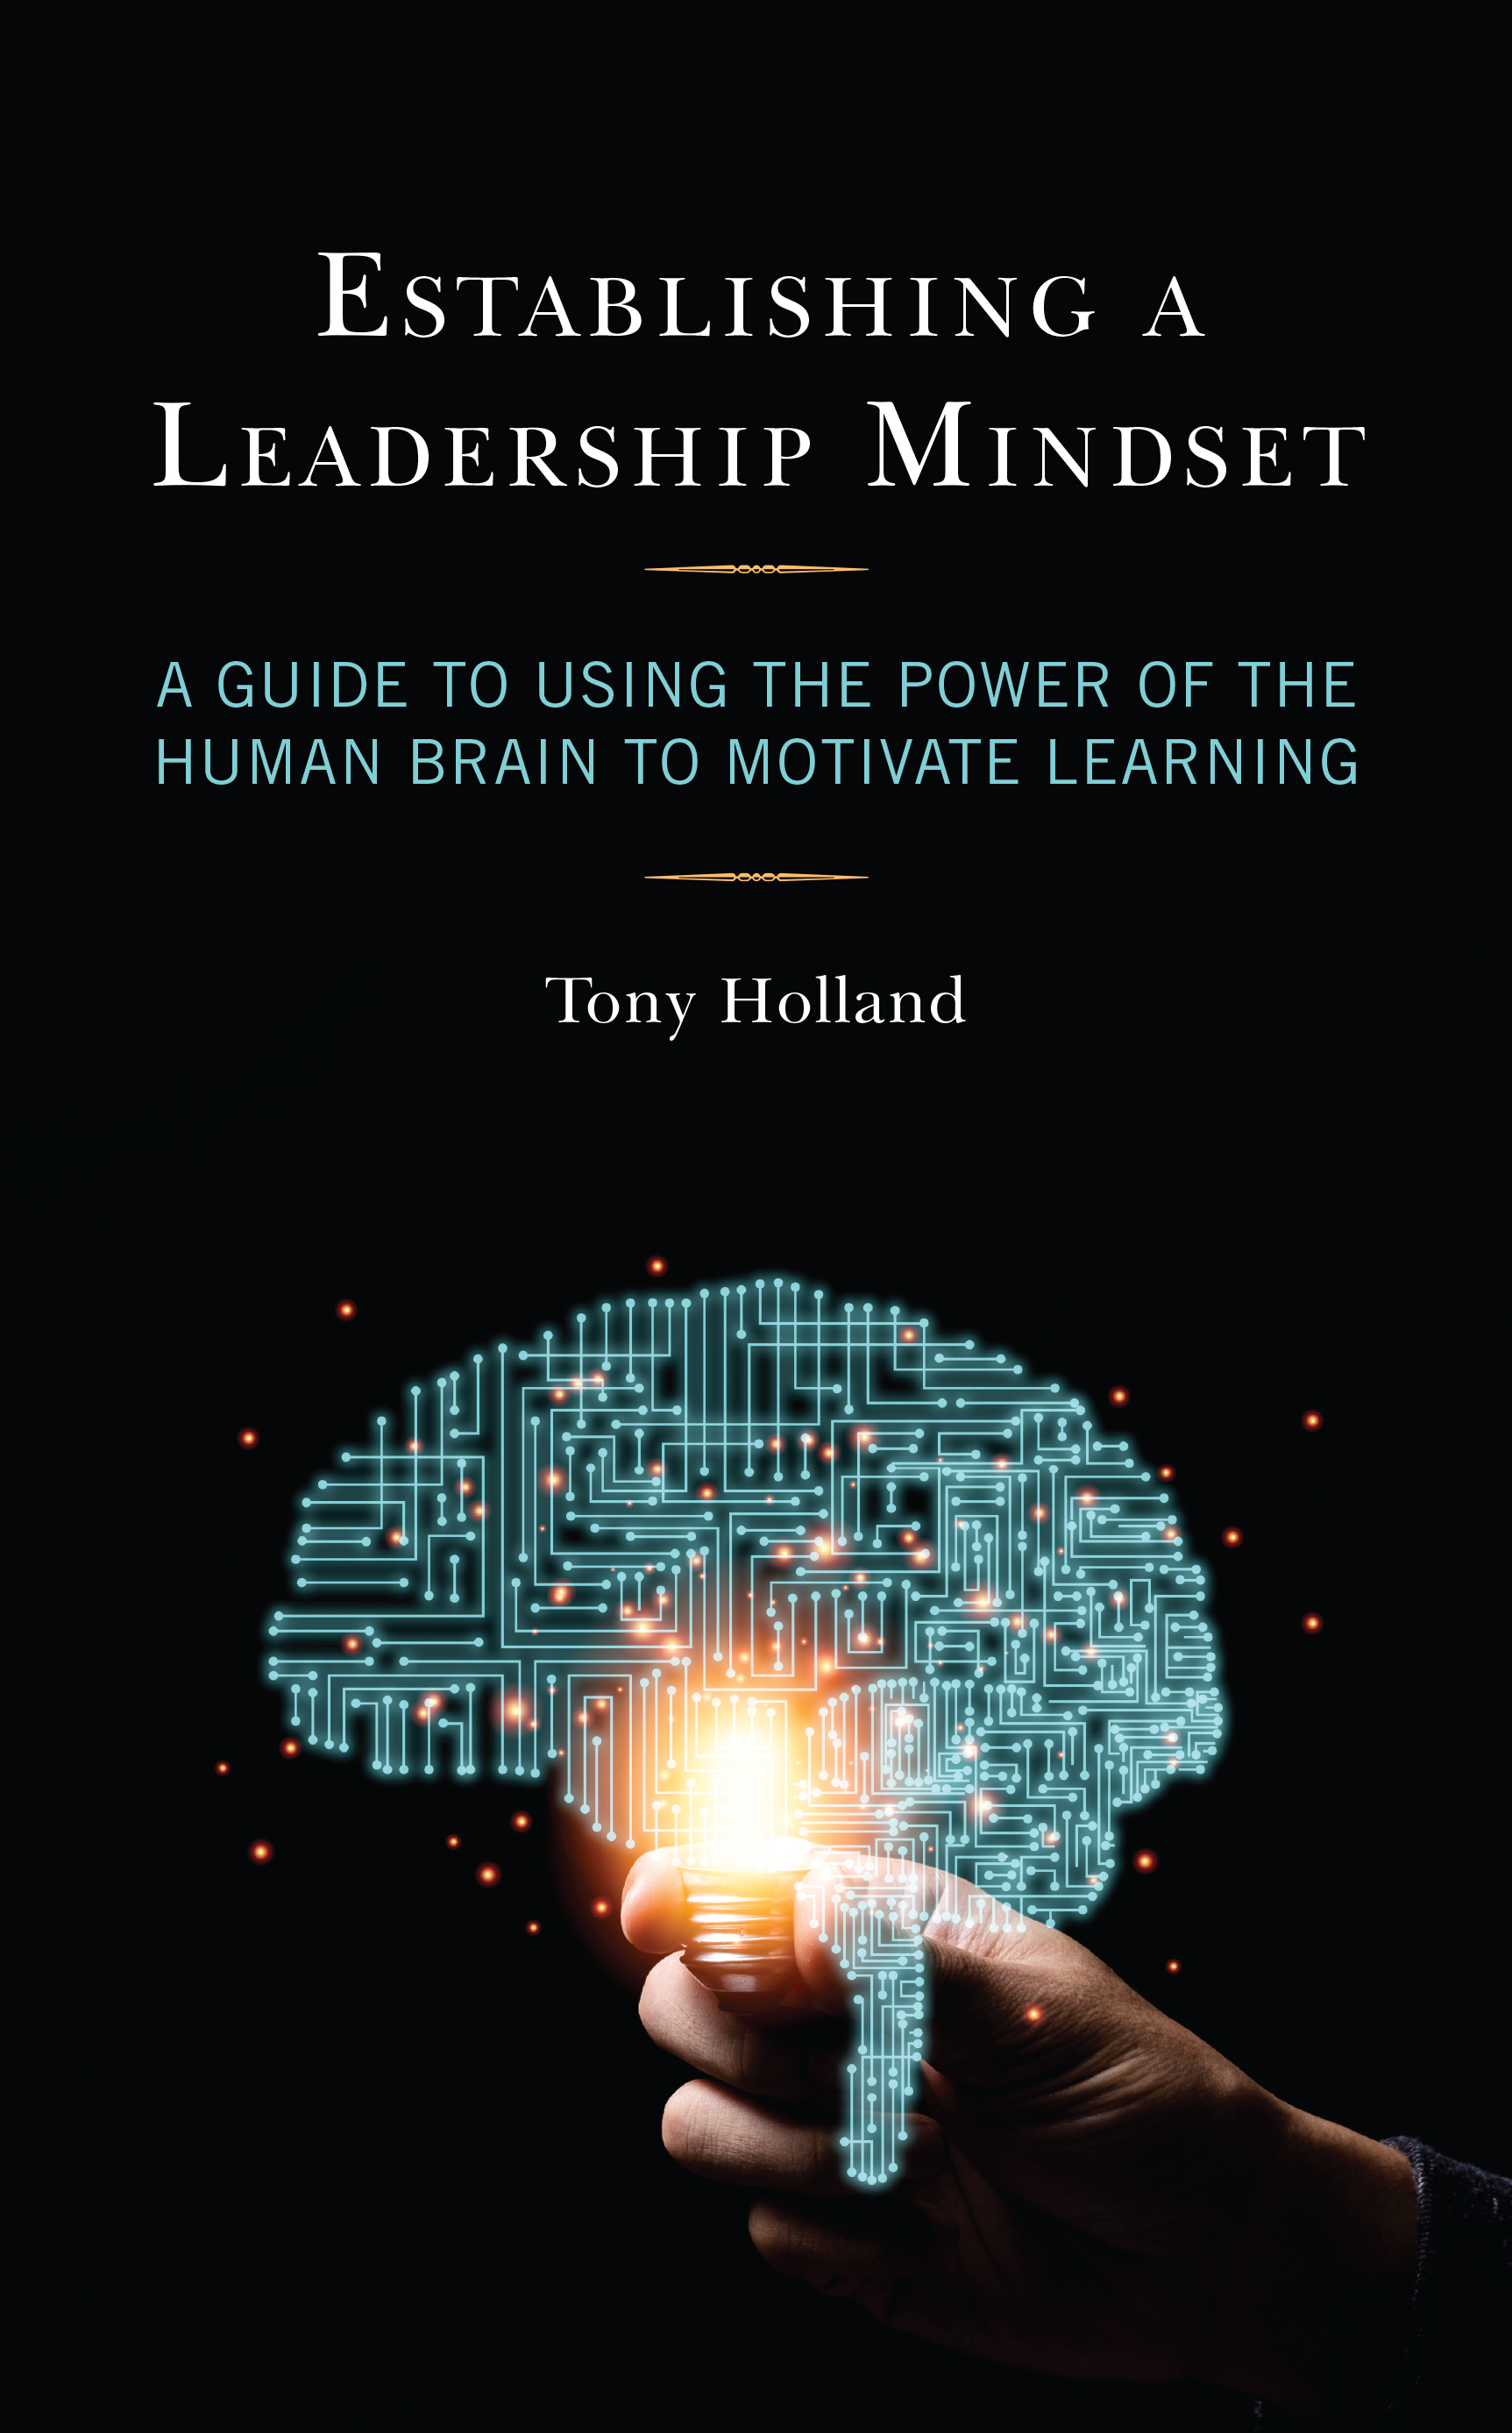 Establishing a Leadership Mindset: A Guide to Using the Power of the Human Brain to Motivate Learning